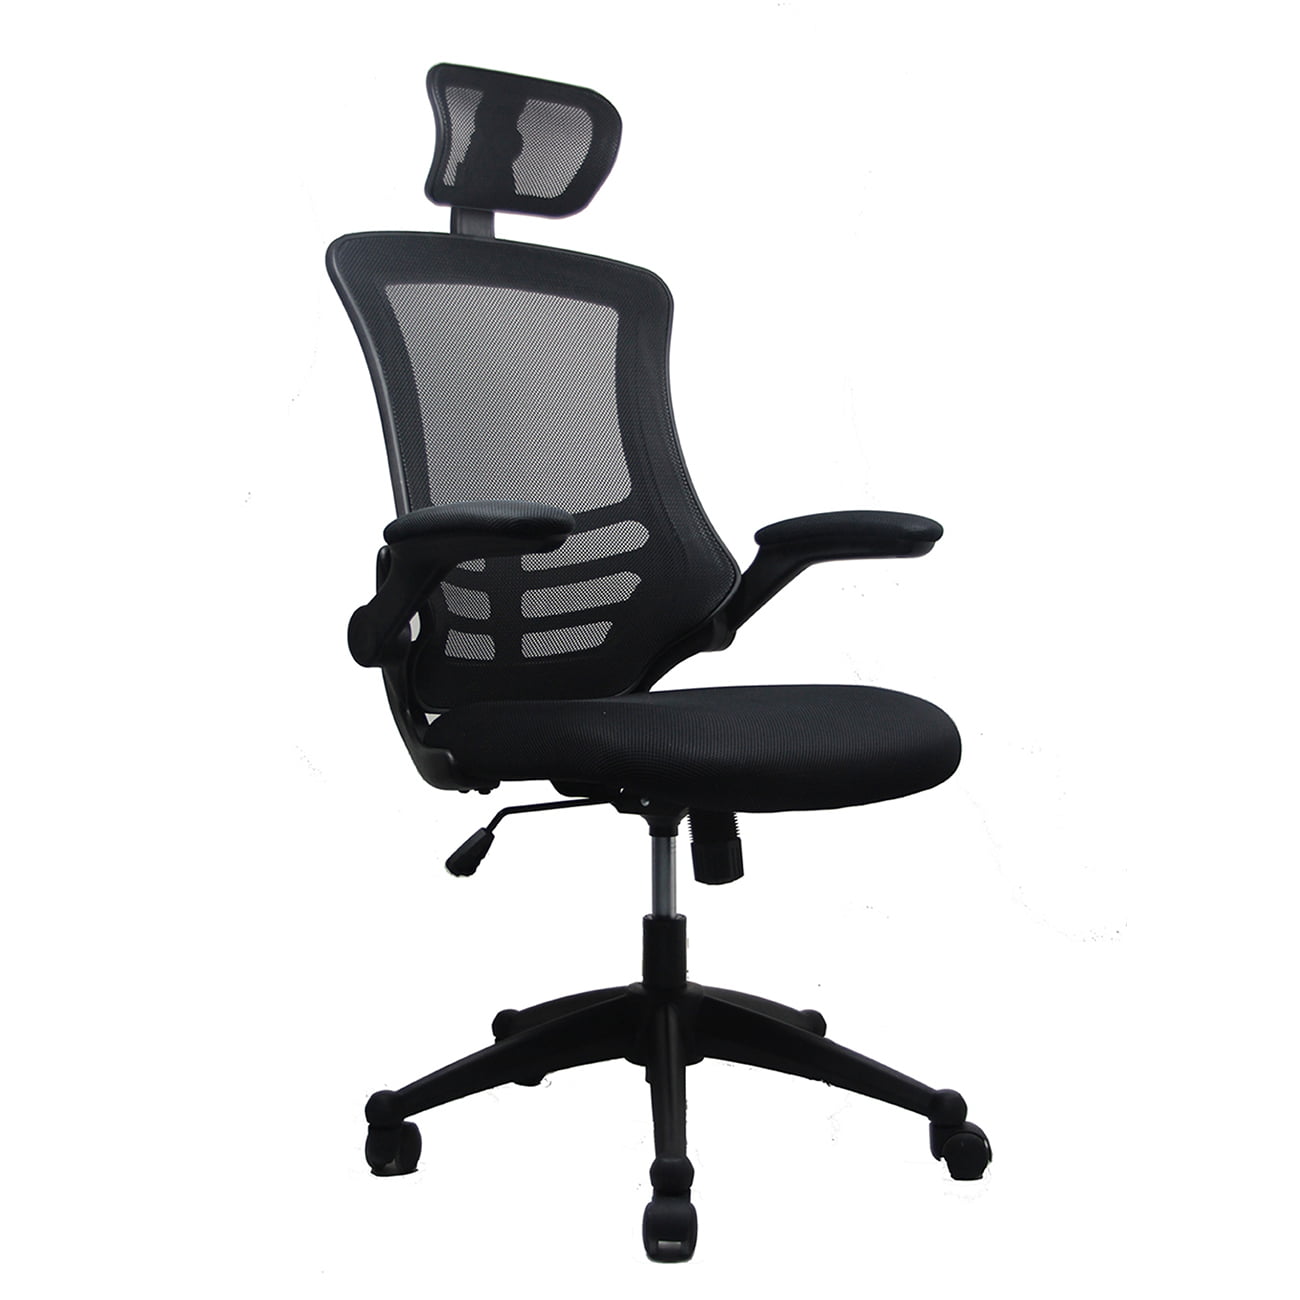 Techni Mobili Modern High-Back Mesh Executive Office Chair with